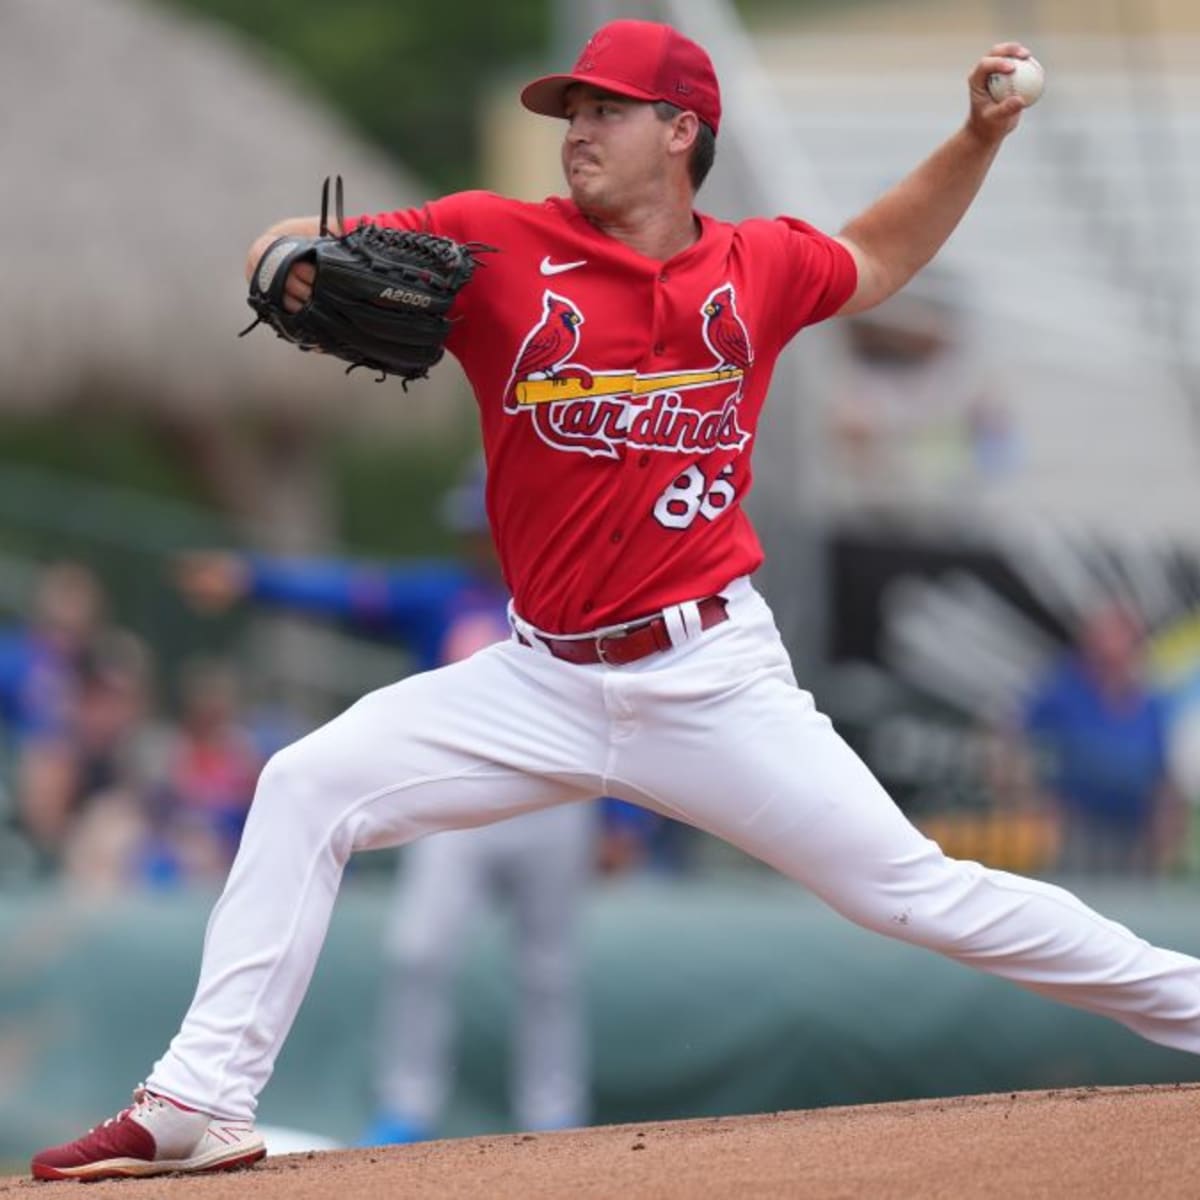 St. Louis Cardinals prospect has unique name, tattoo, 100 mph fastball